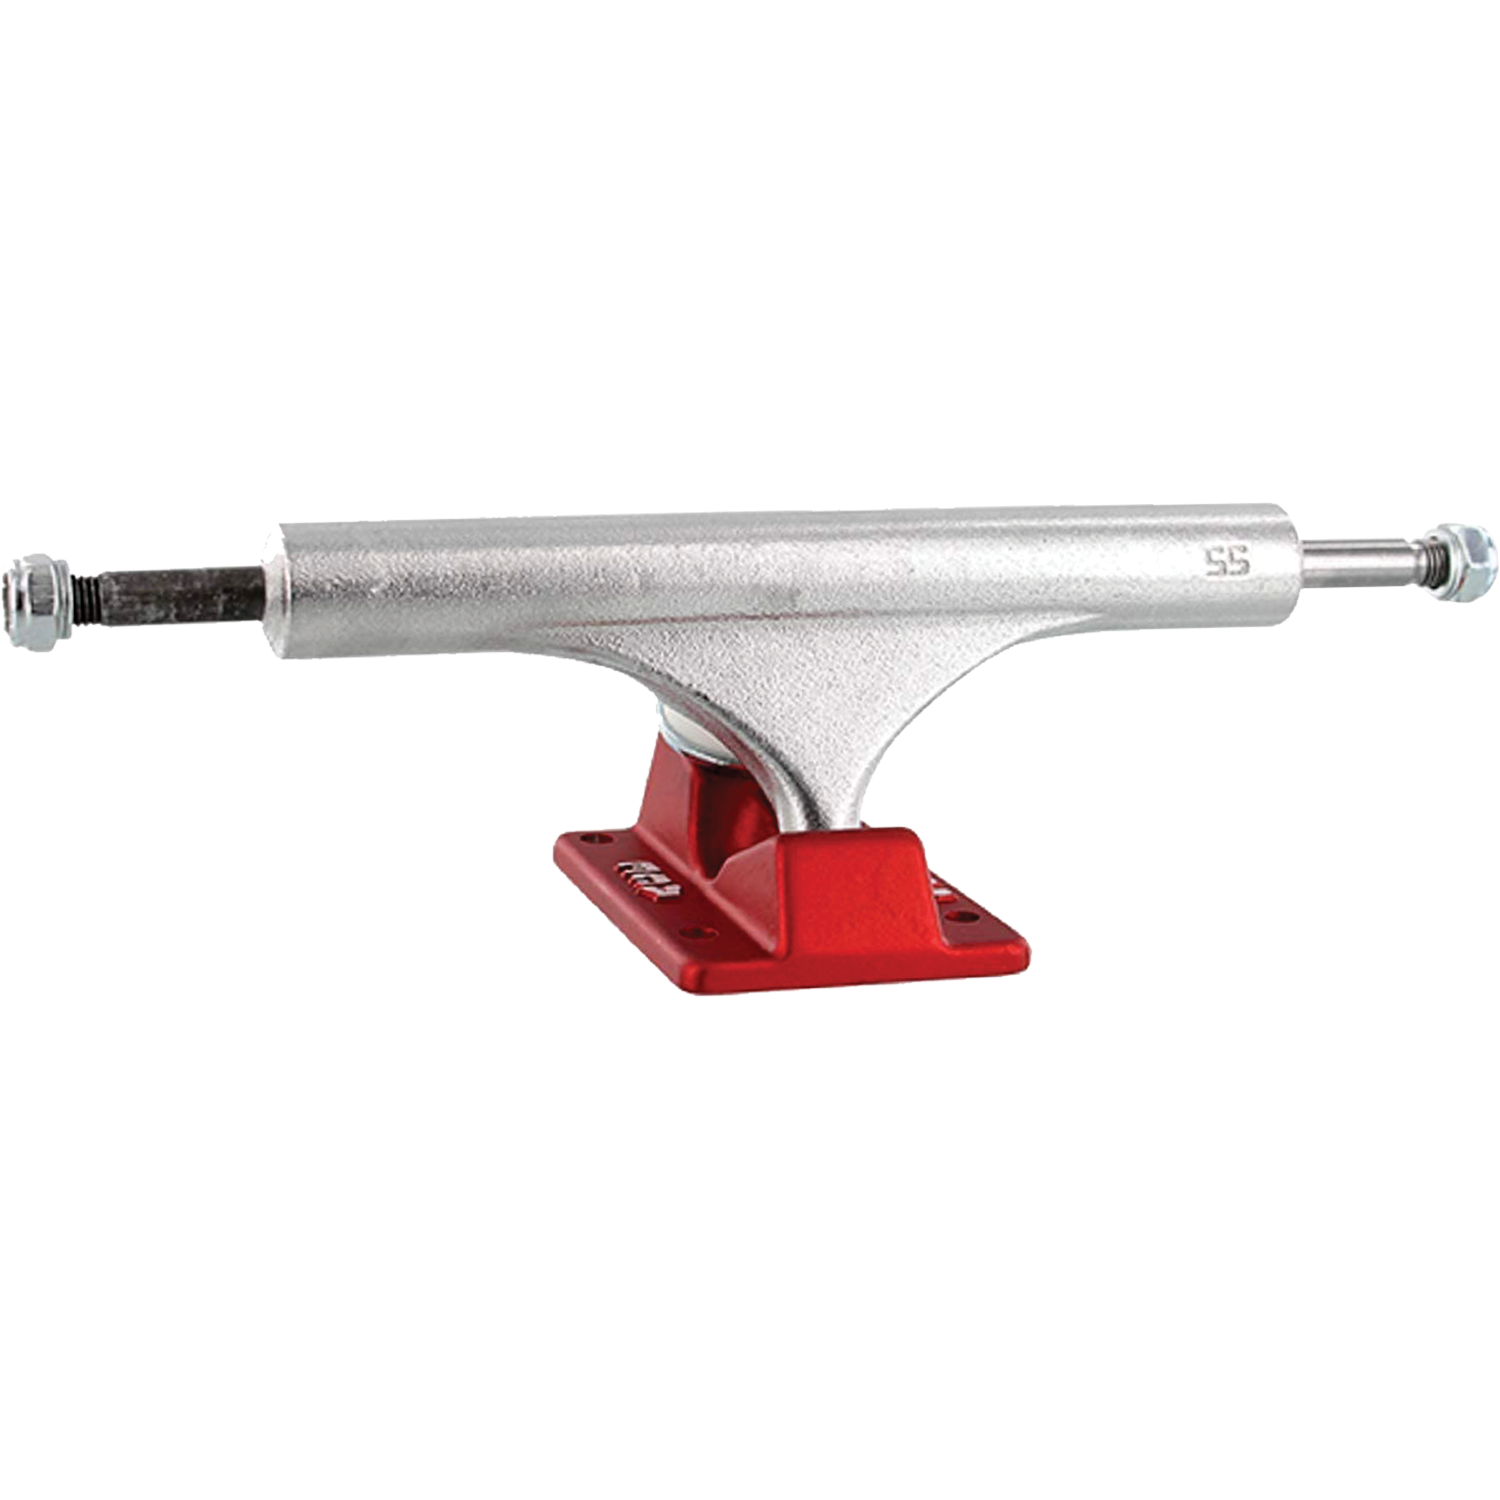 Ace Classic High Truck 55/6.375 Polished/Red Skateboard Trucks (Set of 2)